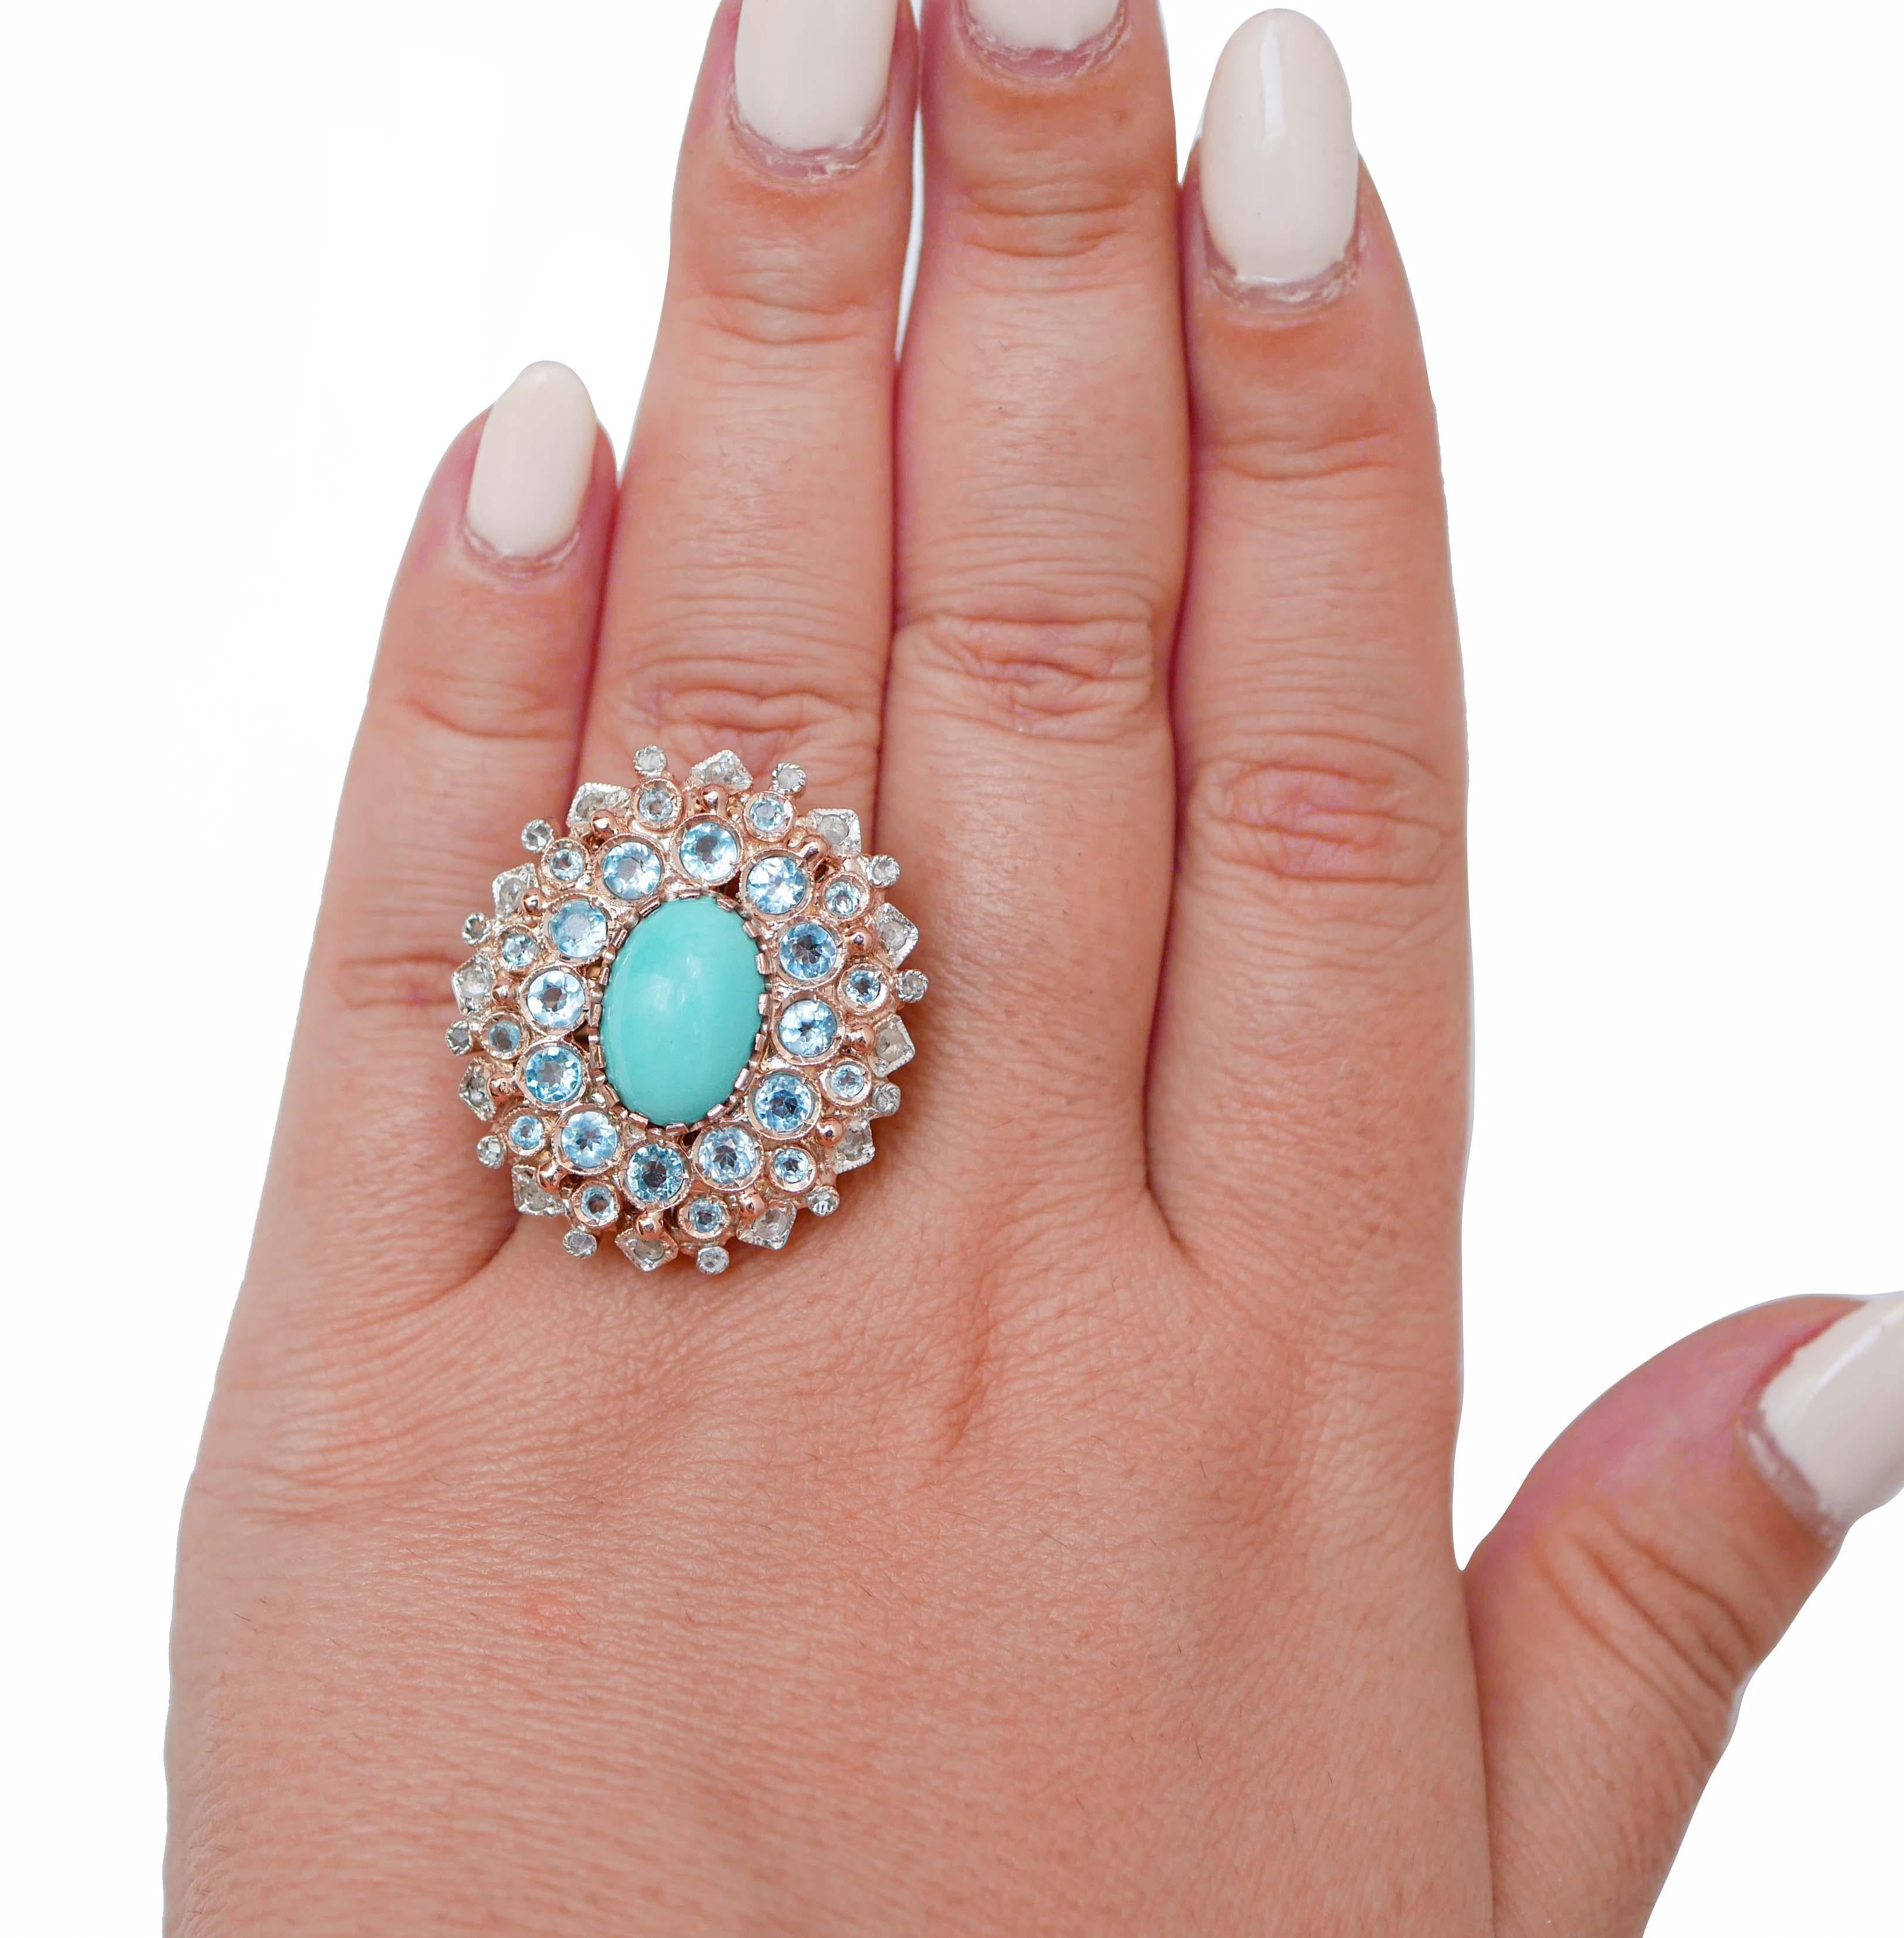 Mixed Cut Turquoise, Topazs, Diamonds, Rose Gold and Silver Ring.